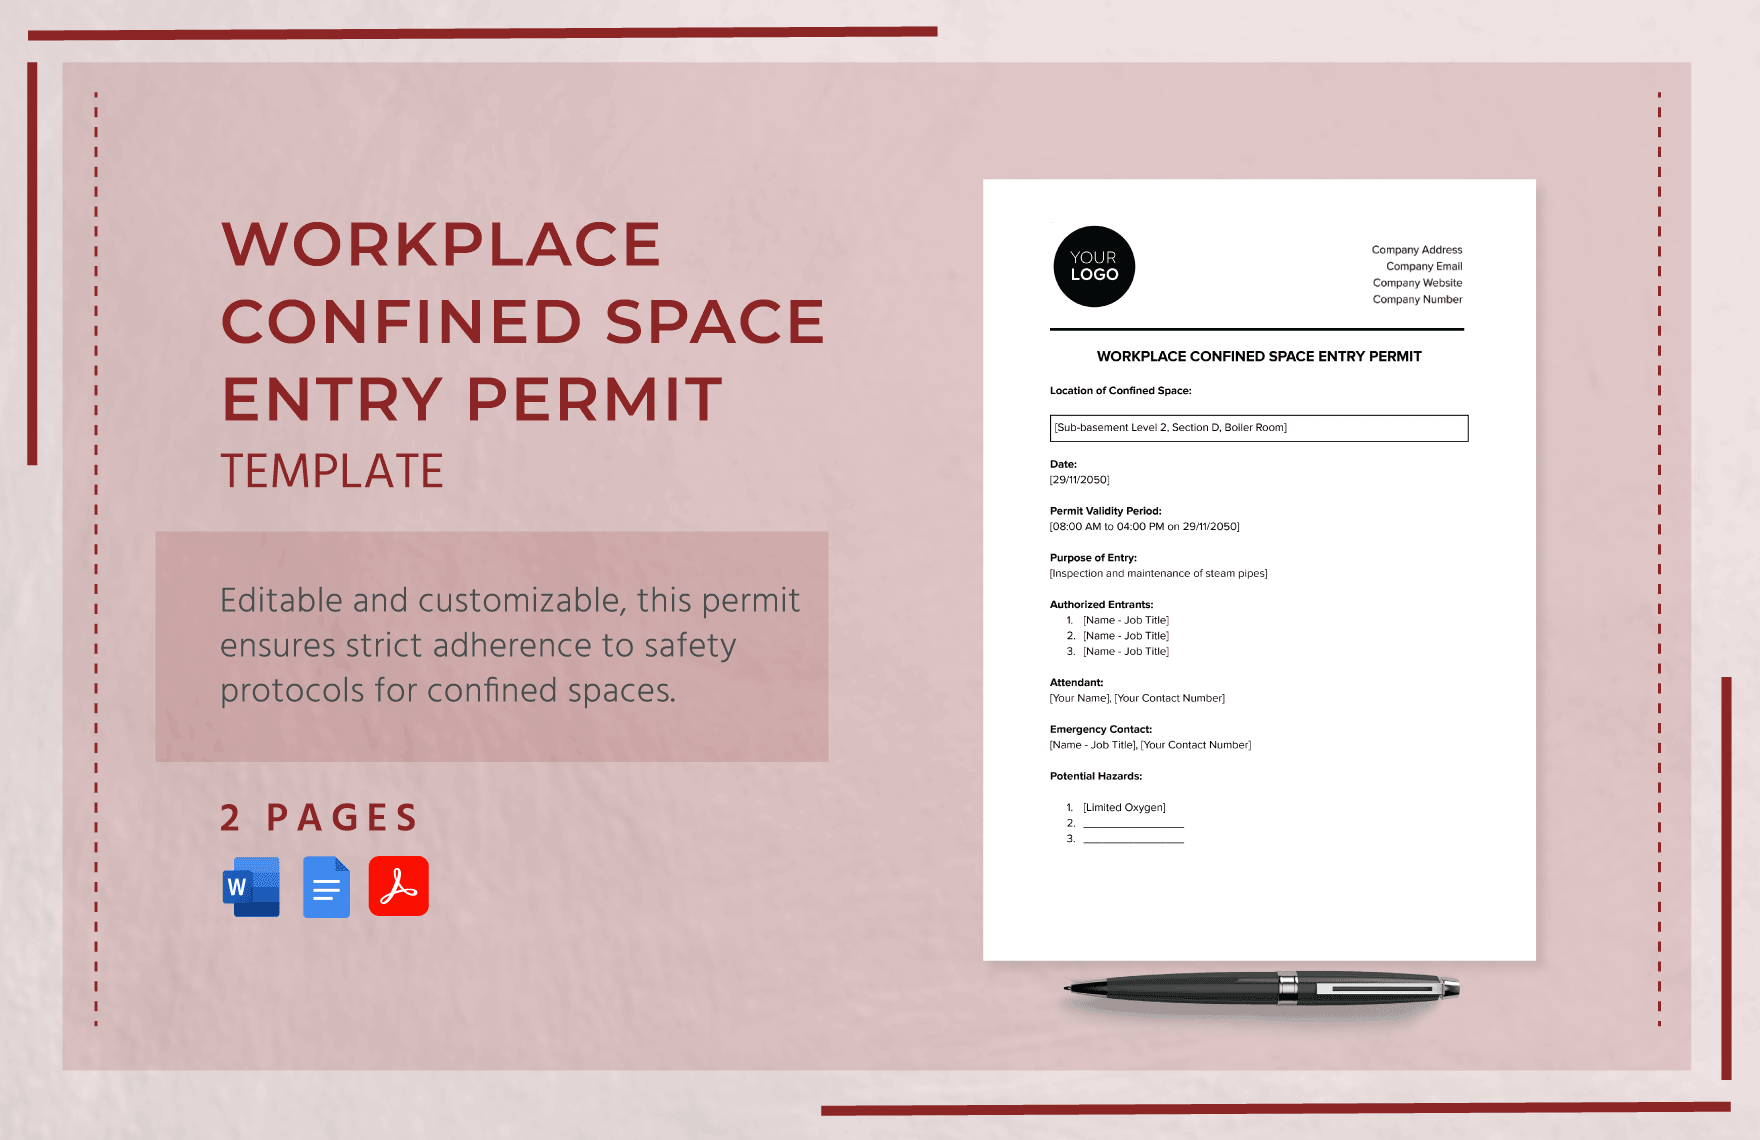 Workplace Confined Space Entry Permit Template in Word, Google Docs, PDF